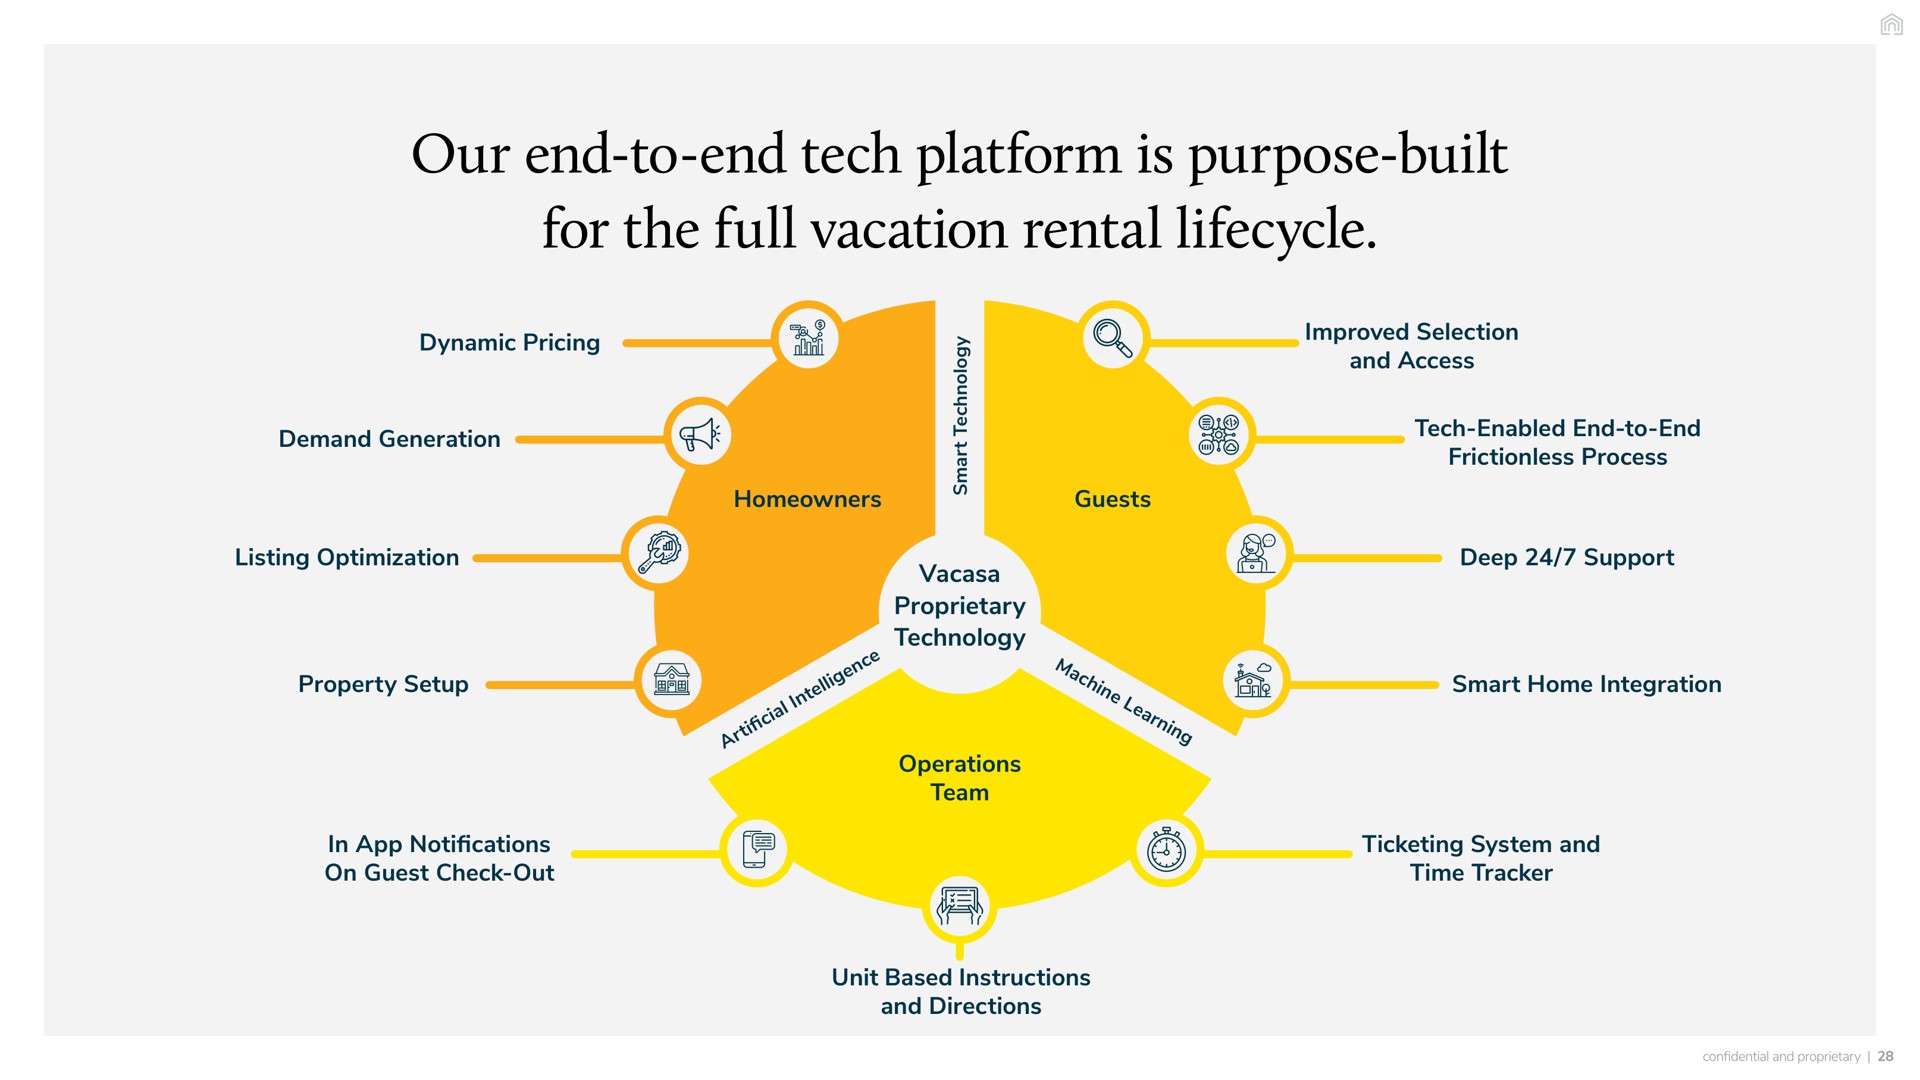 our end to end tech platform is purpose built for the full vacation rental dynamic pricing demand generation listing optimization property setup a improved selection and access tech enabled frictionless process so deep support smart home integration in notifications on guest check out ticketing system and time tracker unit based instructions and directions | Vacasa